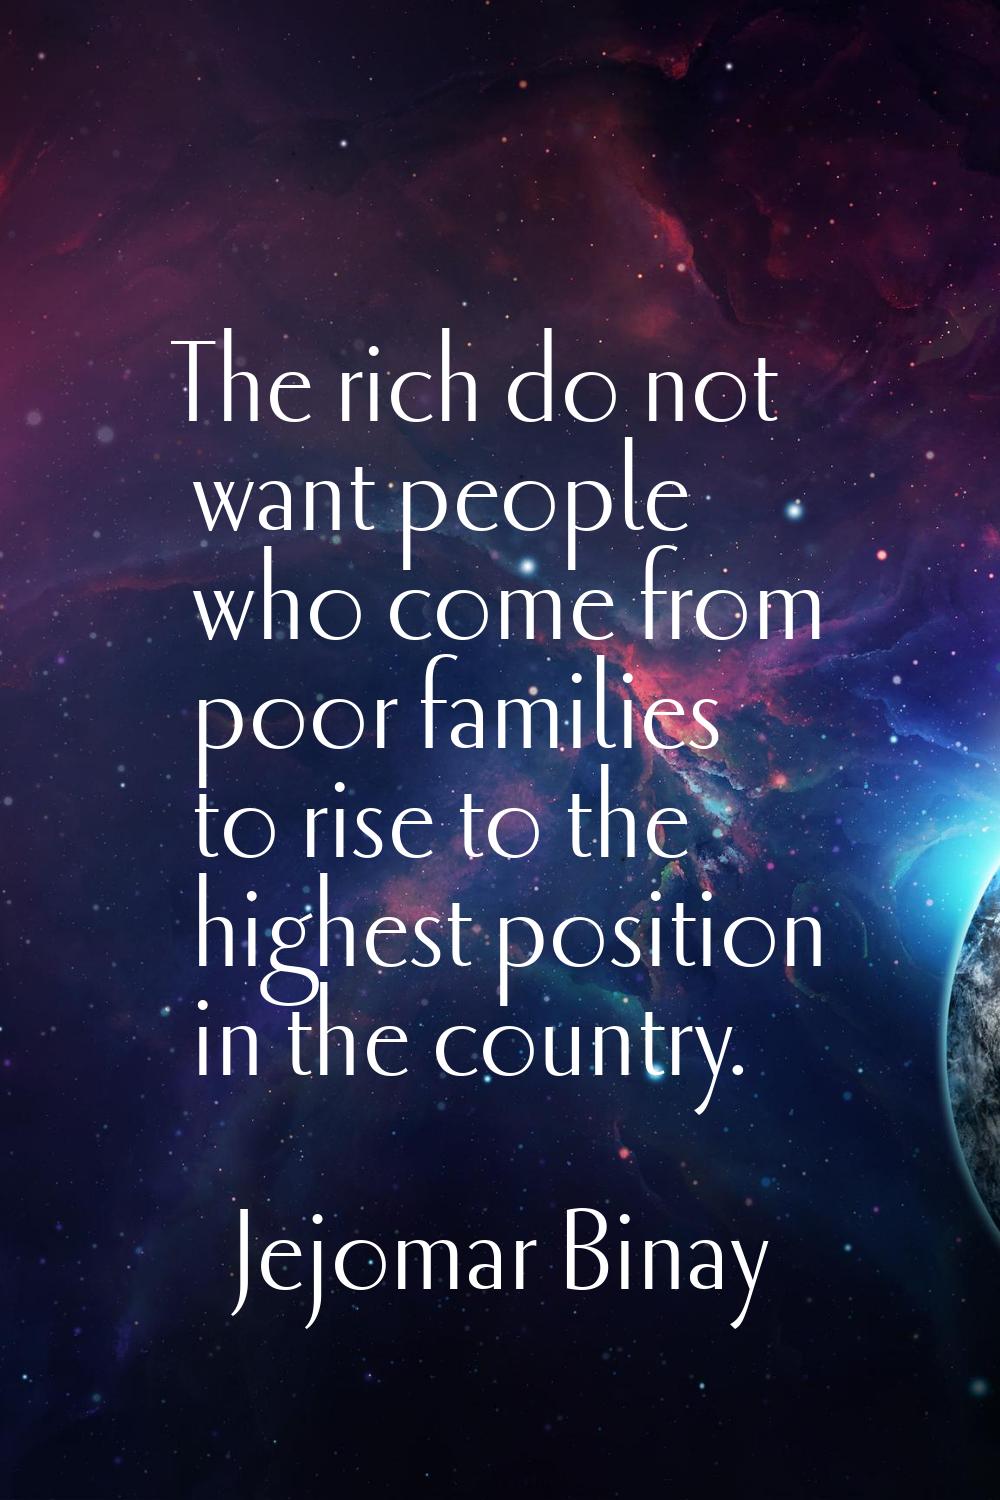 The rich do not want people who come from poor families to rise to the highest position in the coun